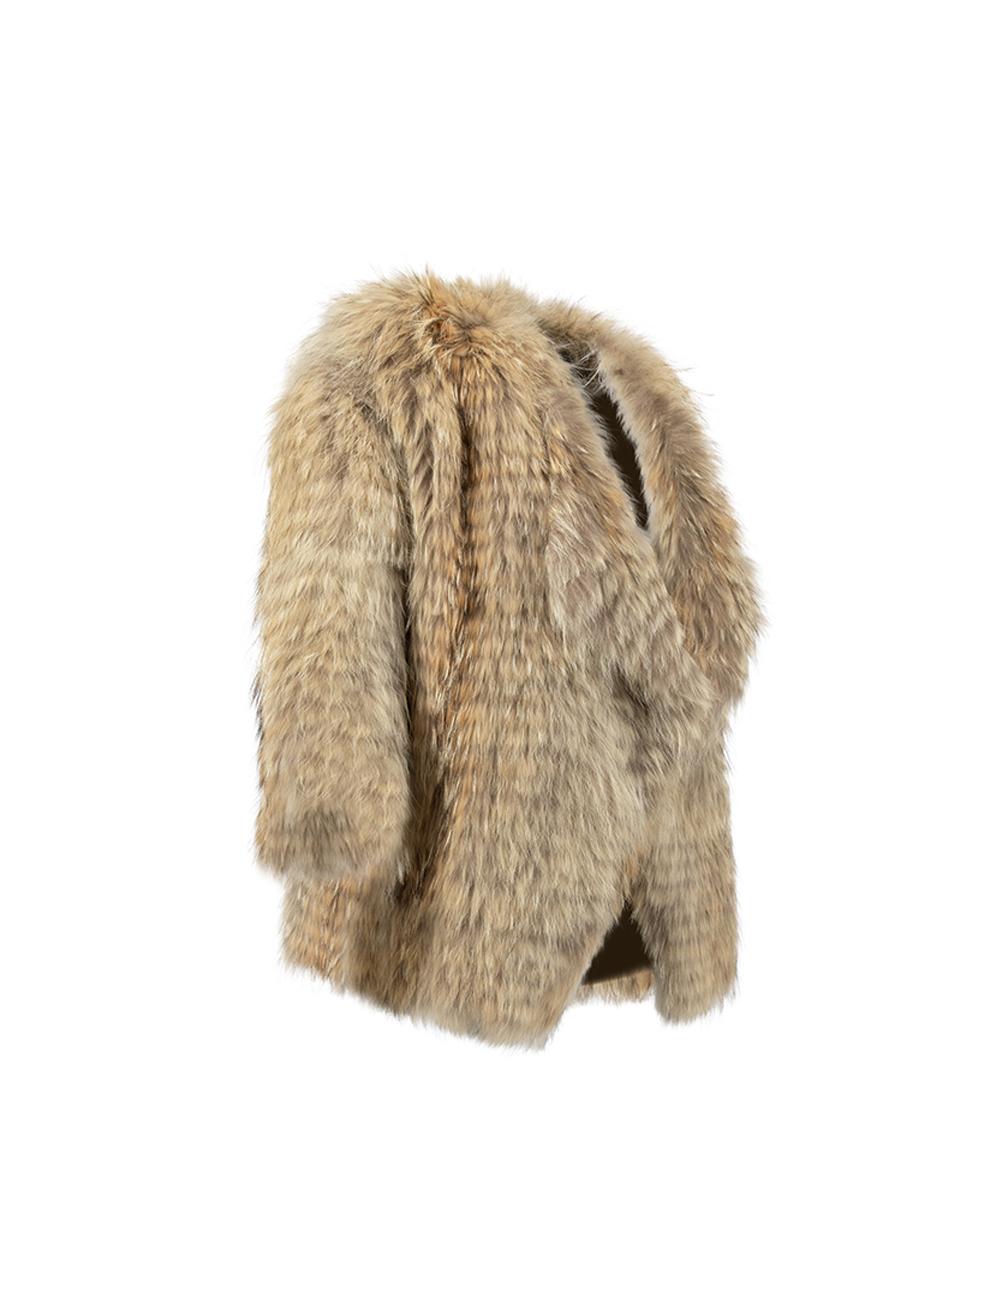 CONDITION is Very good. Minimal wear to jacket is evident. Minimal wear to the satin interior where pulls to the thread can be seen on this used Vince designer resale item. 

Details
Brown
Coyote fur
Short length jacket
Mid length sleeves
Open